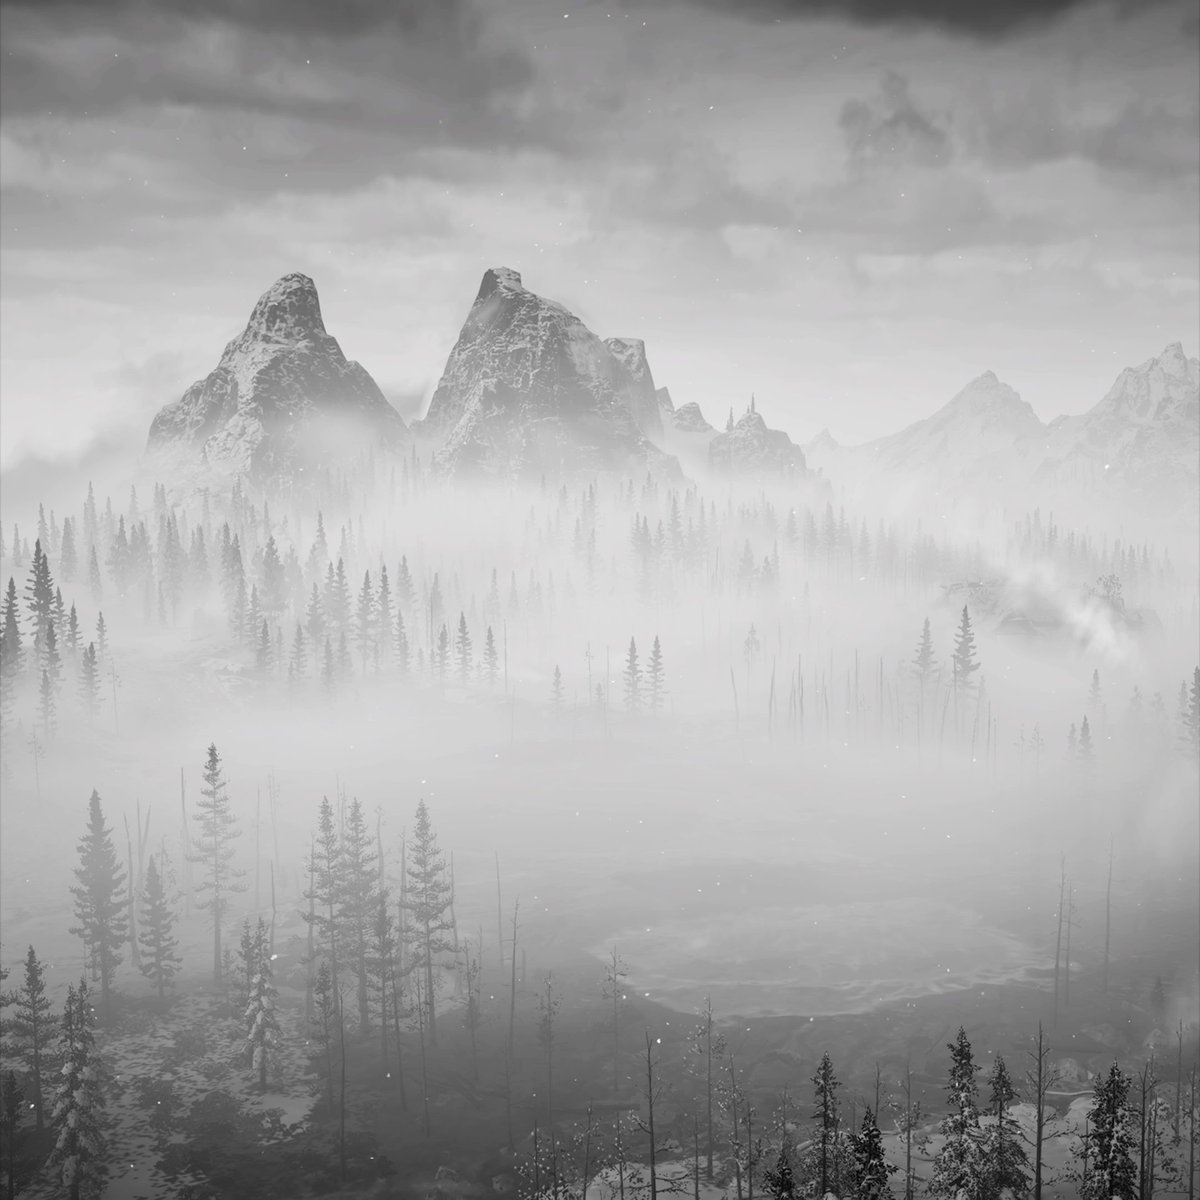 I think Ansel Adams would have loved this View! #HorizonZeroDawn #TheFrozenWilds. #HorizonZeroDawnTheFrozenWIlds #HZDPhotomode #Photomode #HZDWinter #Blackandwihte #landscape #VirtualPhotography